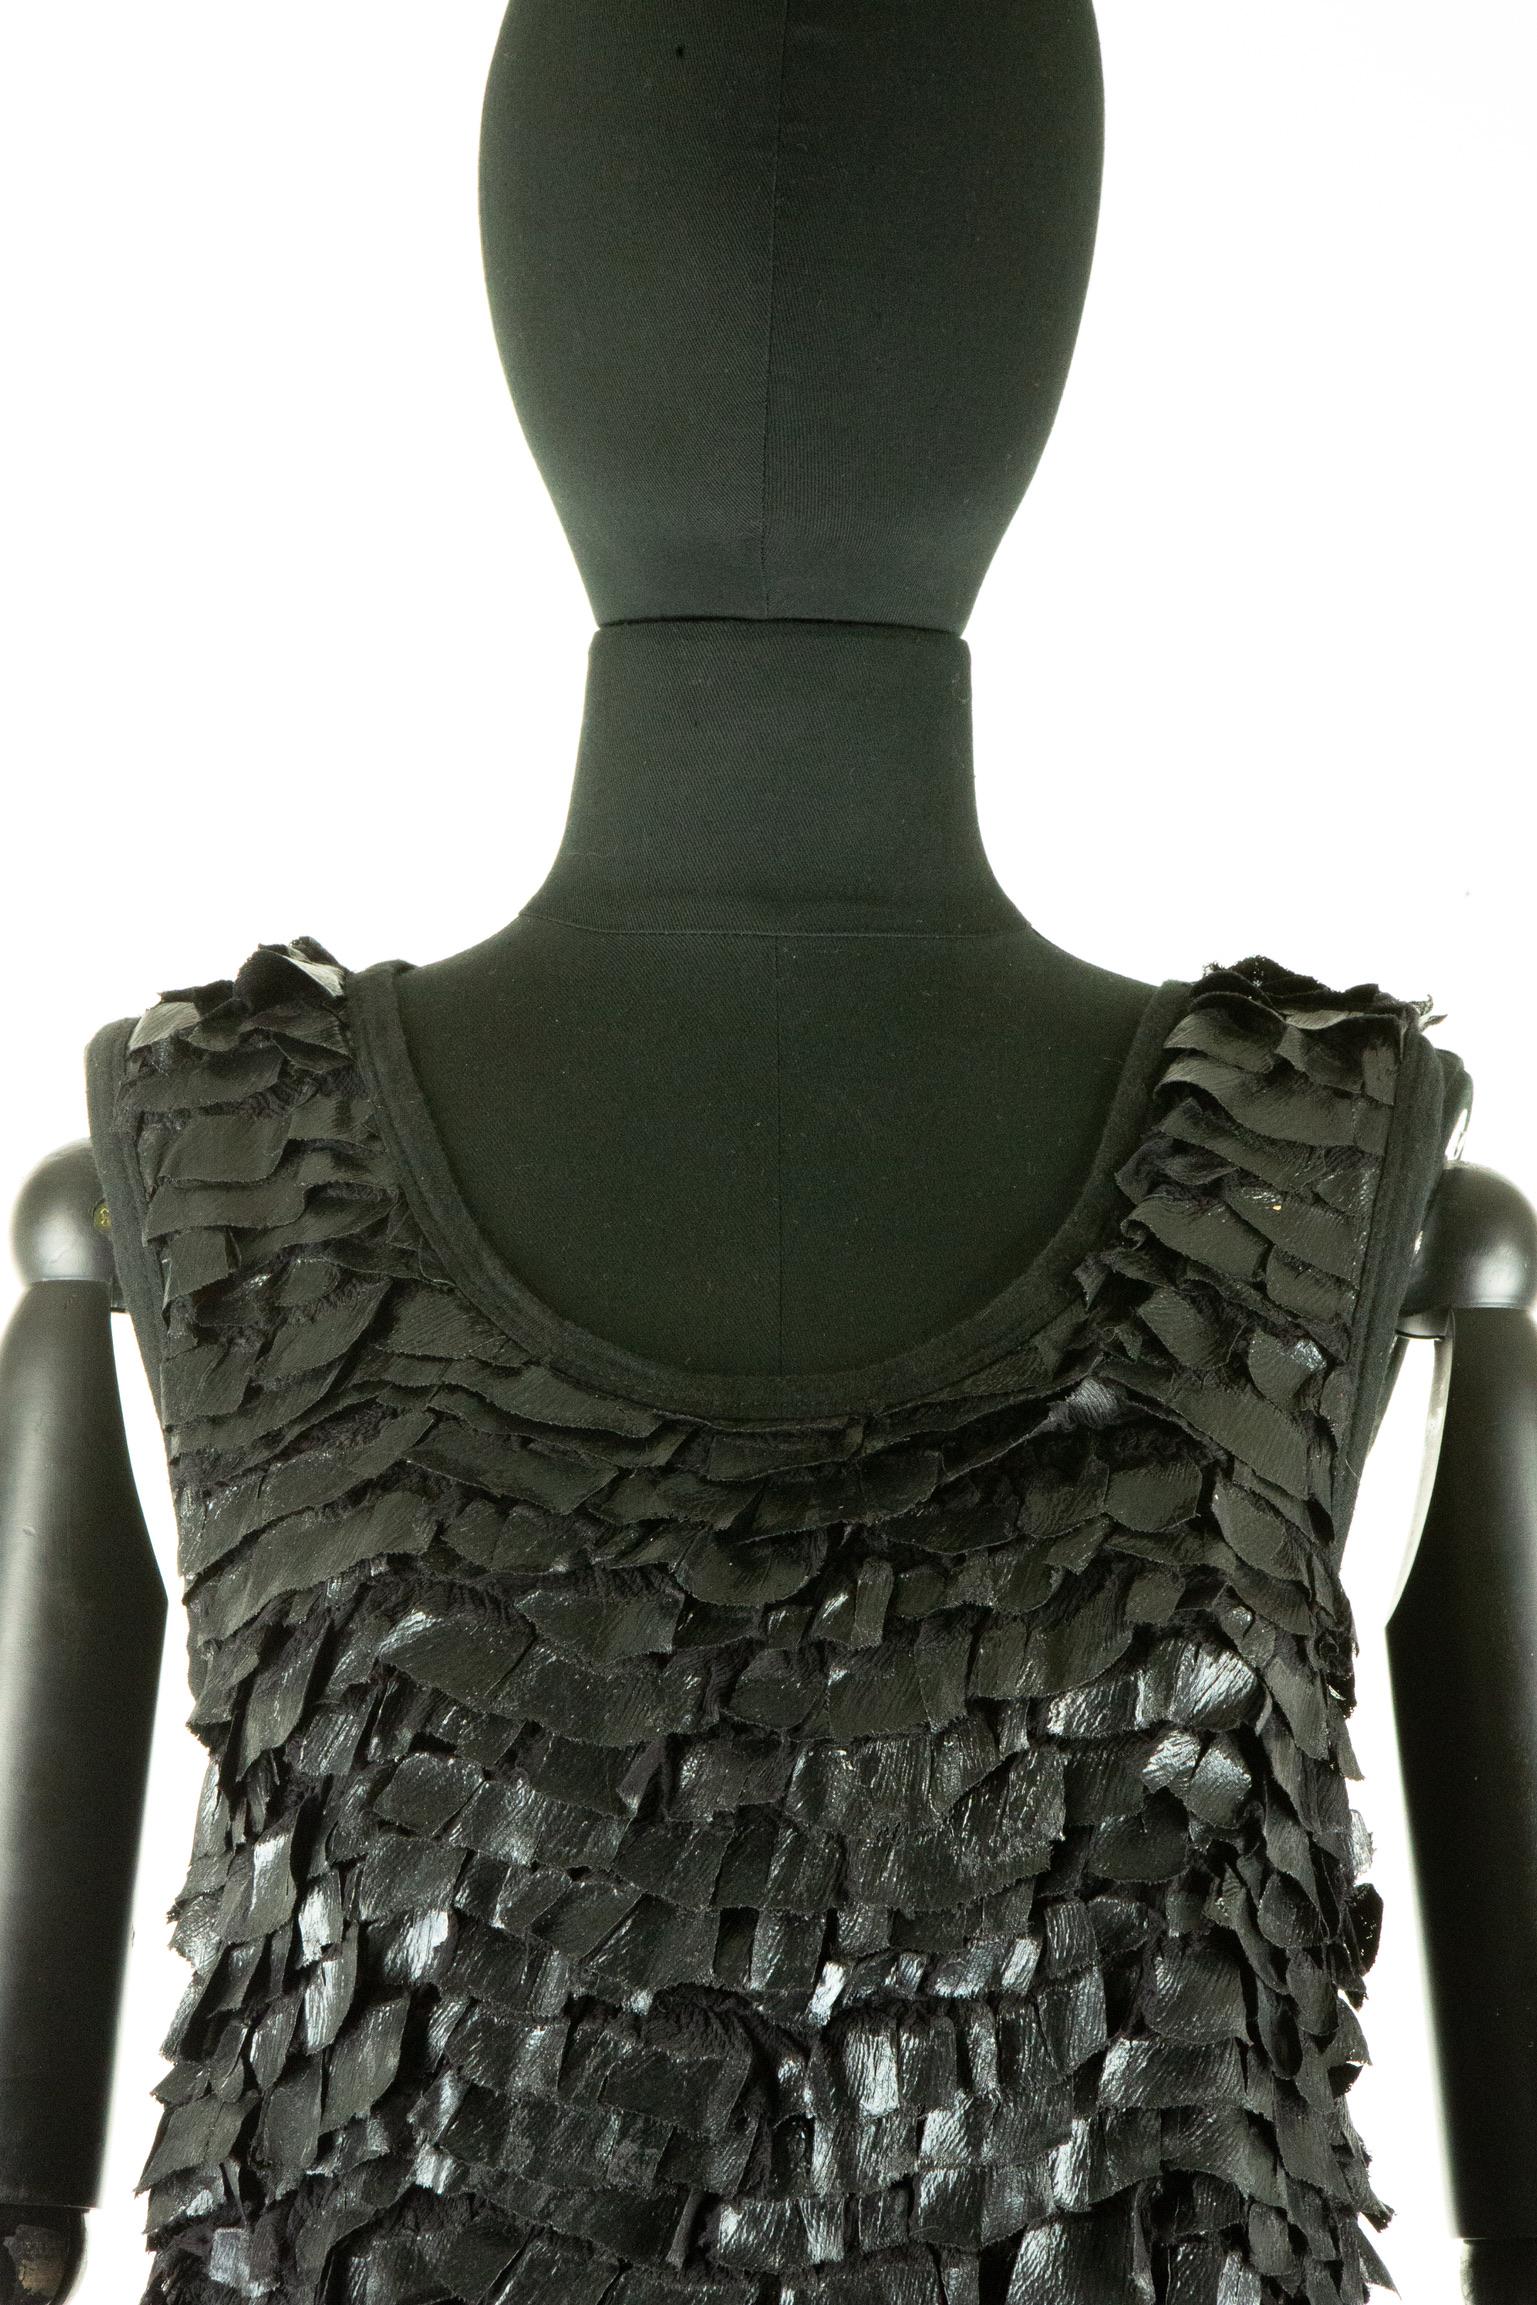 This contemporary Givenchy tank top has pleated chiffon ruffles with patent details covering the front bodice only. The garment also has a scoop neckline and a black jersey back. This item carries the Givenchy authenticity label.

This item is sold